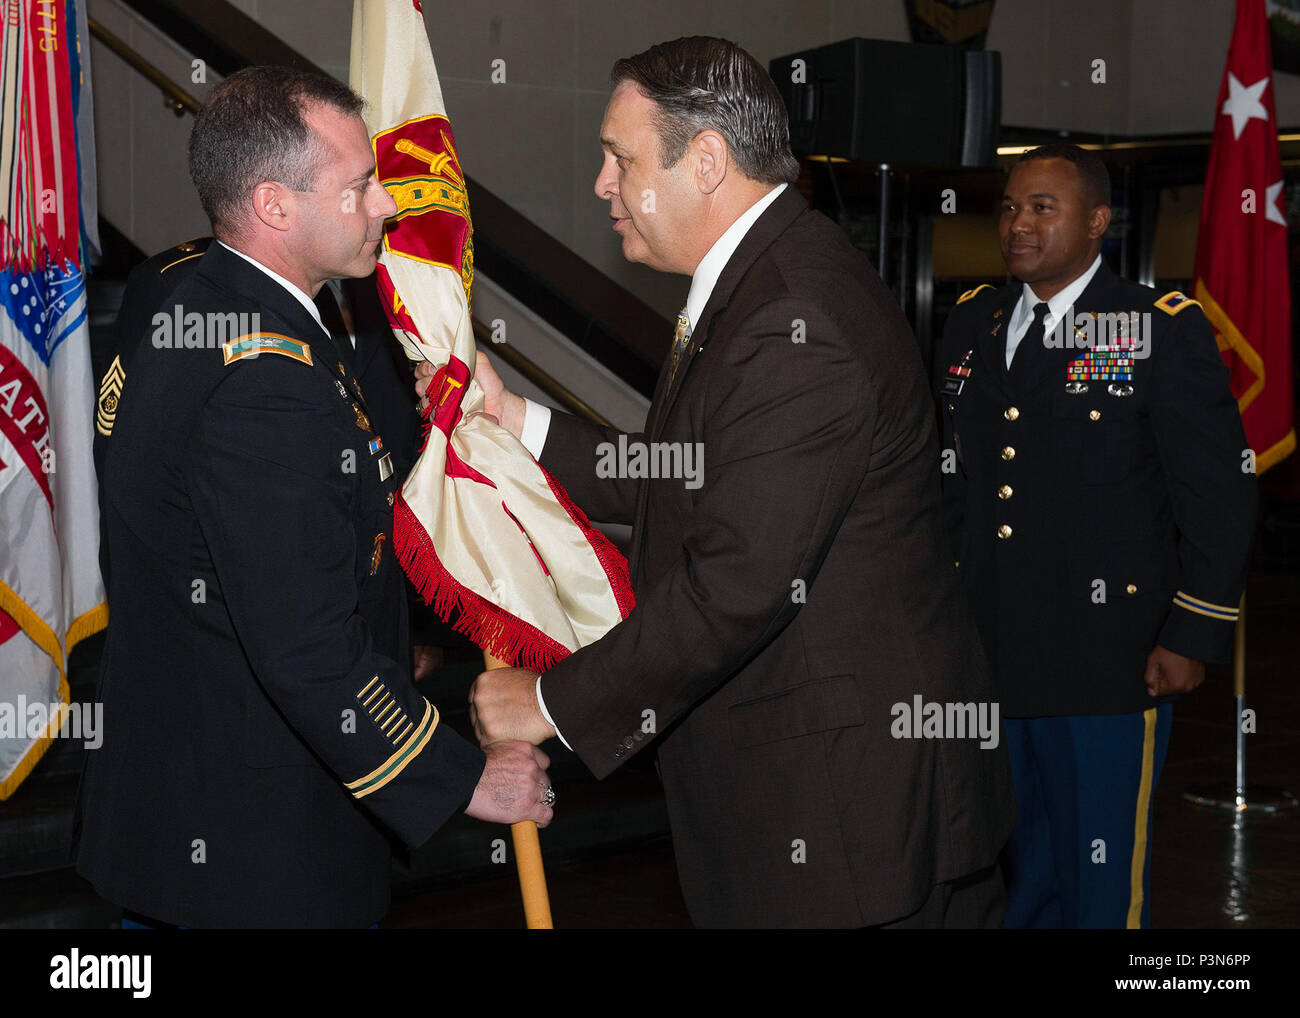 Col. Andrew S. Hanson (left) receives the U.S. Army Garrison - West Point  colors from Mr. Davis Tindoll, Director of U.S. Army Installation  Management Command - Atlantic, at Eisenhower Hall in West